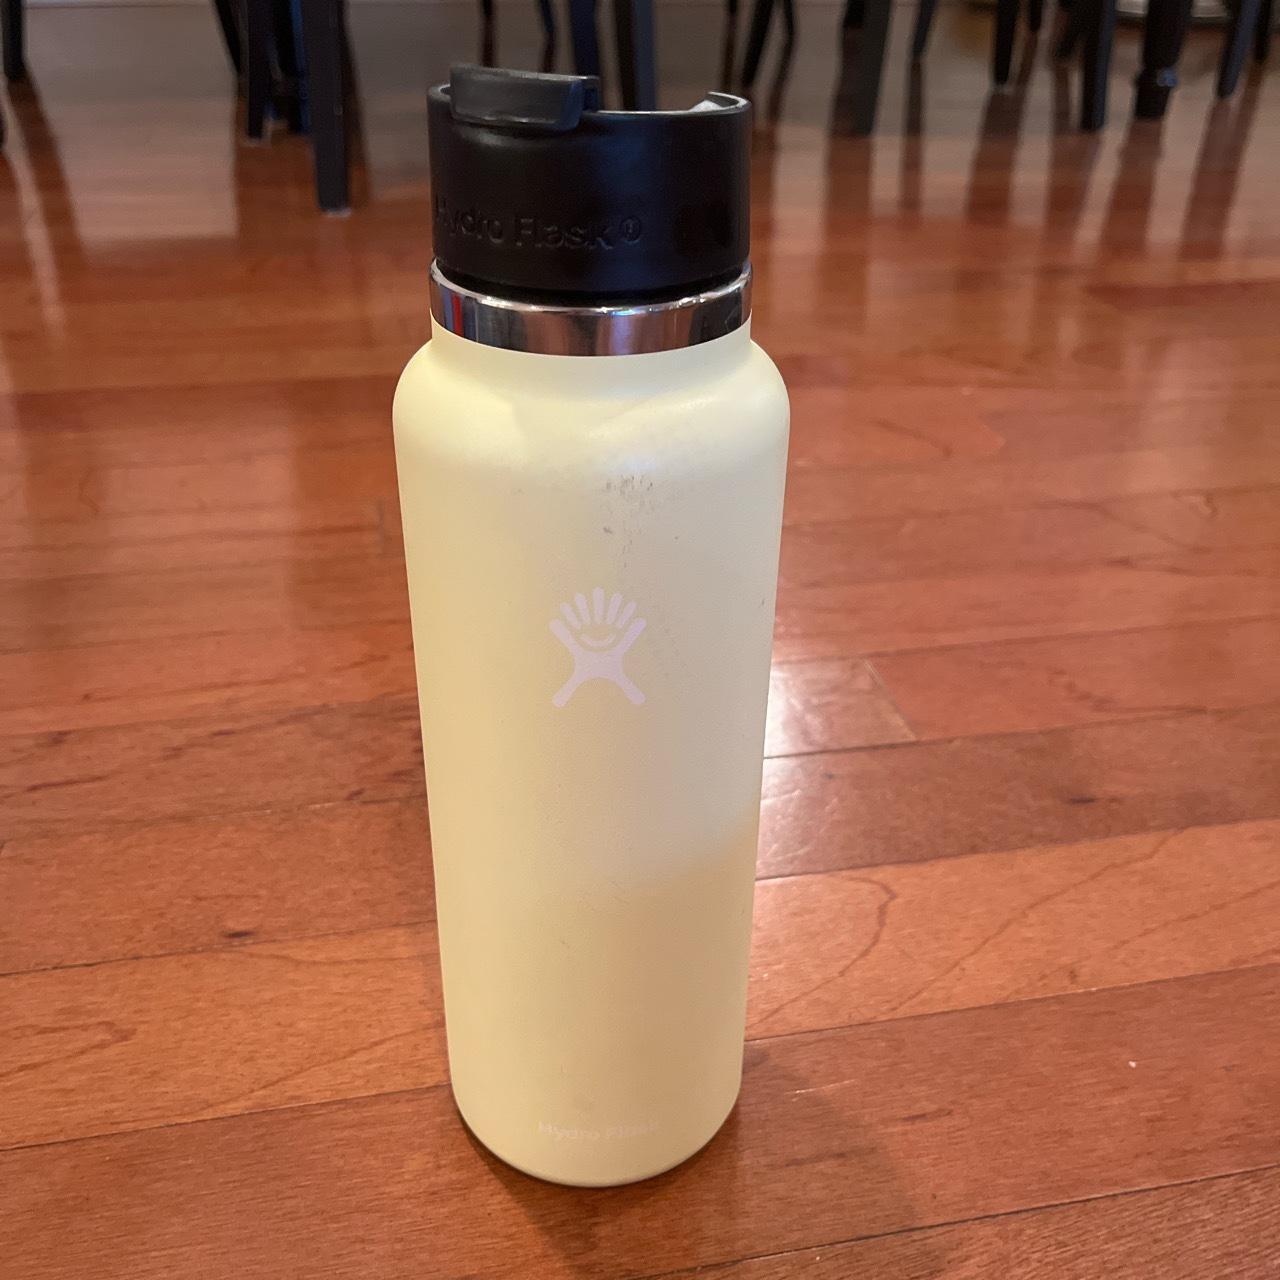 Hydro Flask Home